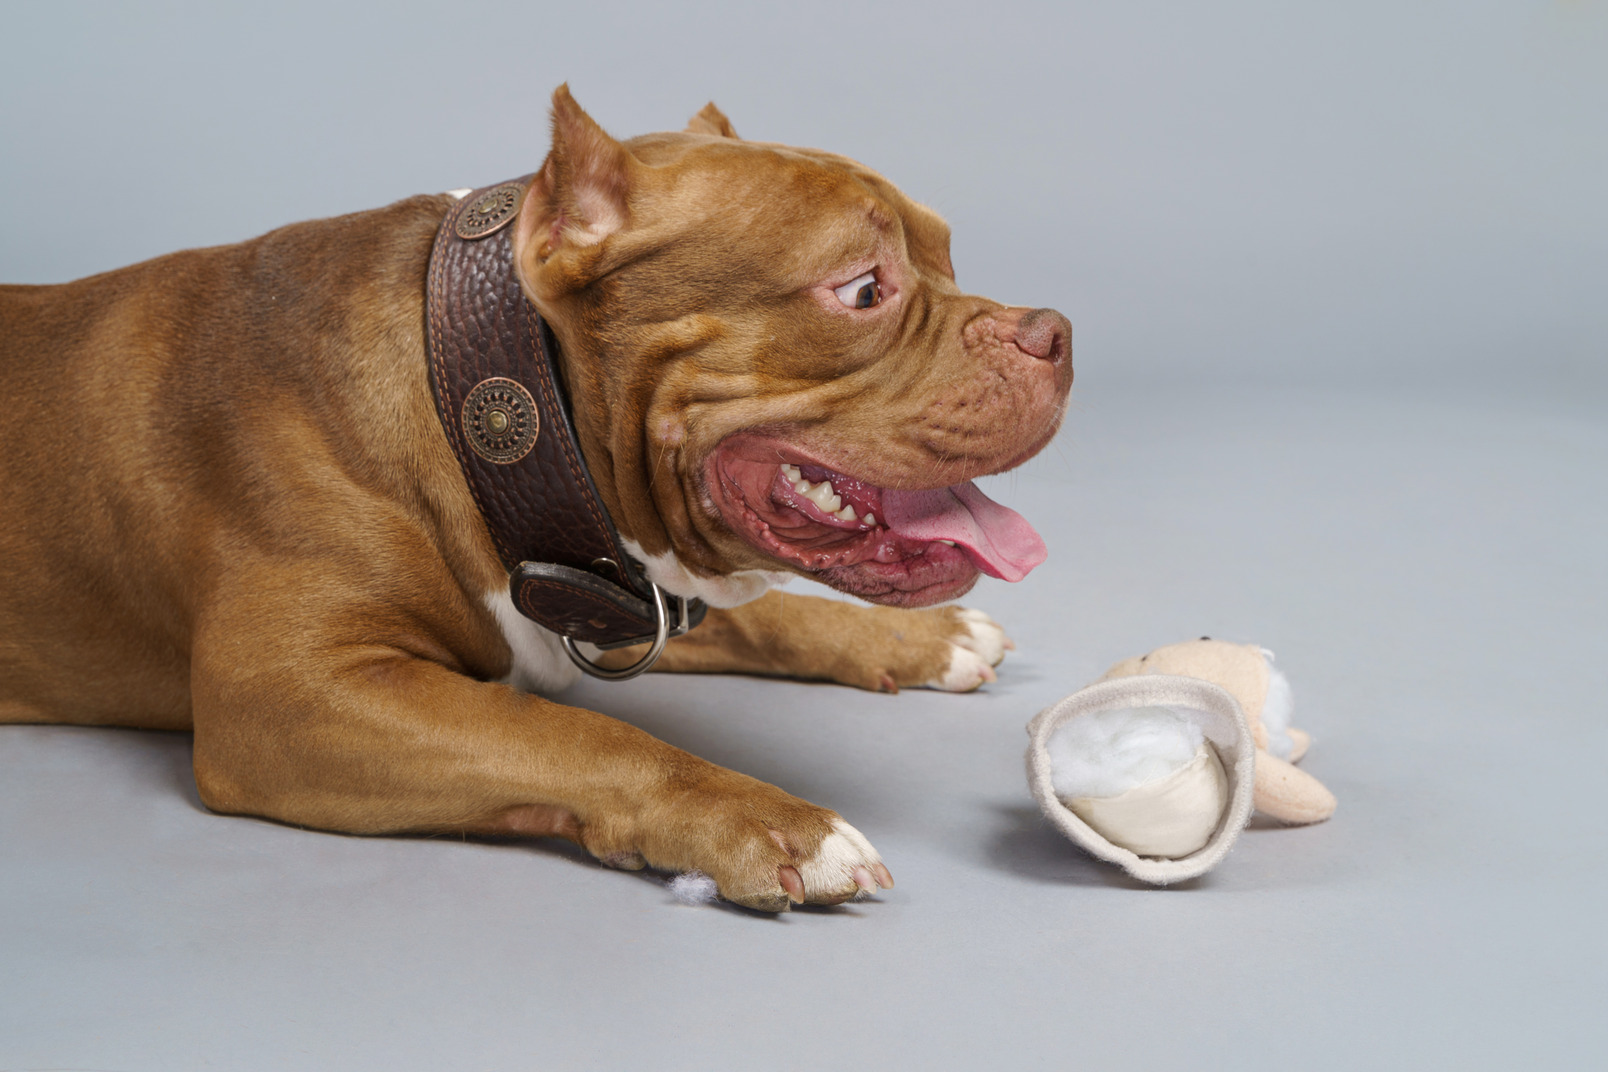 Side view of a brown bulldog with a toy bunny looking aside